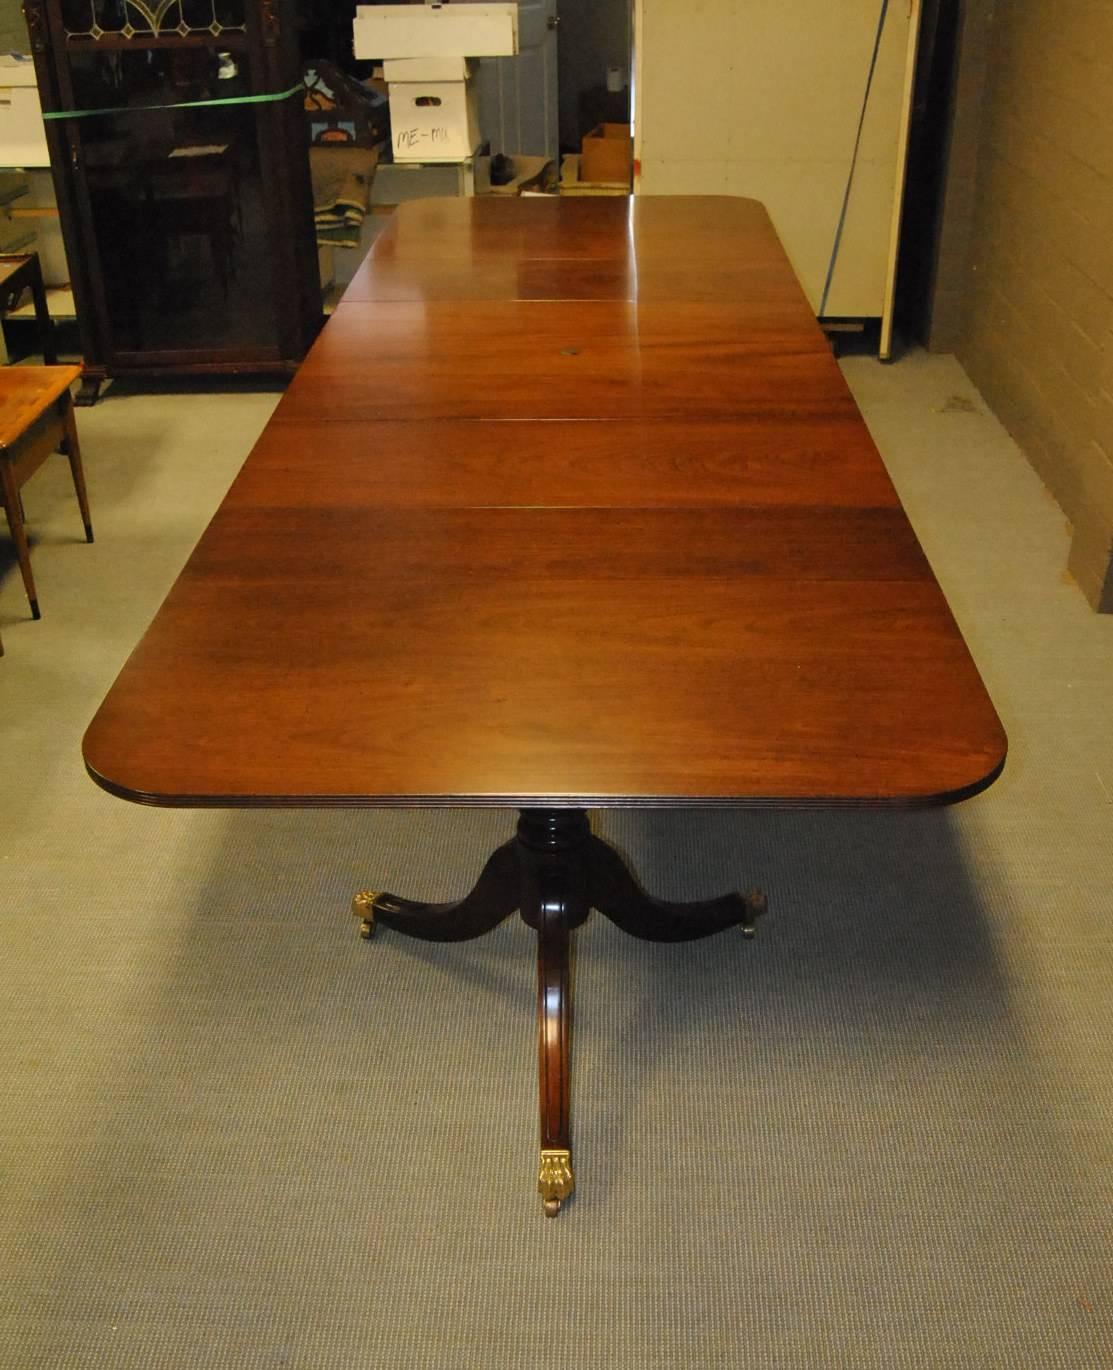 An unusual 18th century style mahogany conference table by Kittinger. The table features three pedestals (two with three legs and central pedestal with four legs). Each leg on the pedestal ends in a brass paw cap with caster. Measures: Without the